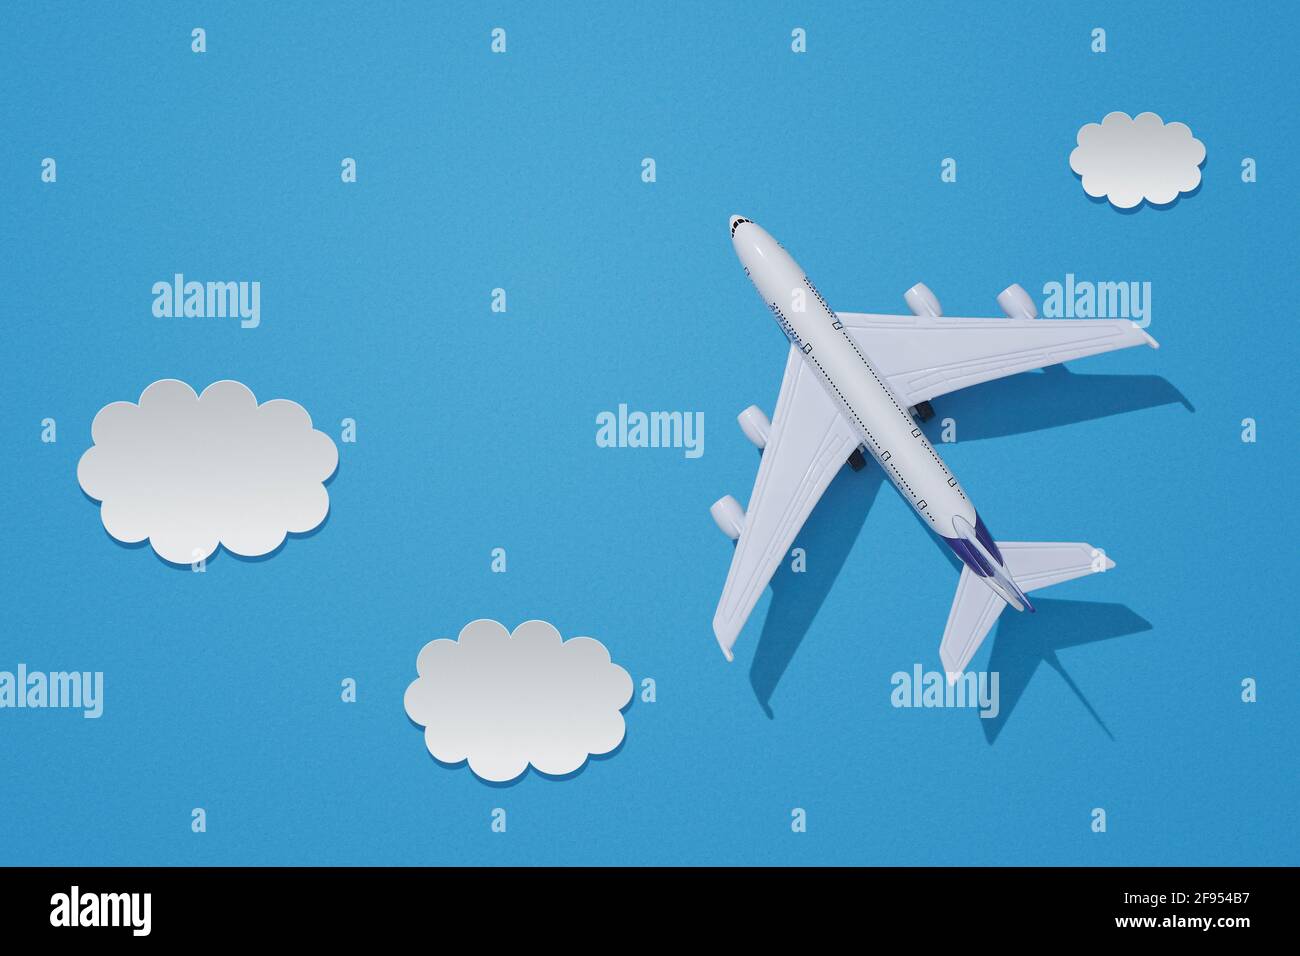 Miniature toy airplane on colorful paper background. Flat lay design of travel concept with plane and clouds on blue sky with copy space. Stock Photo